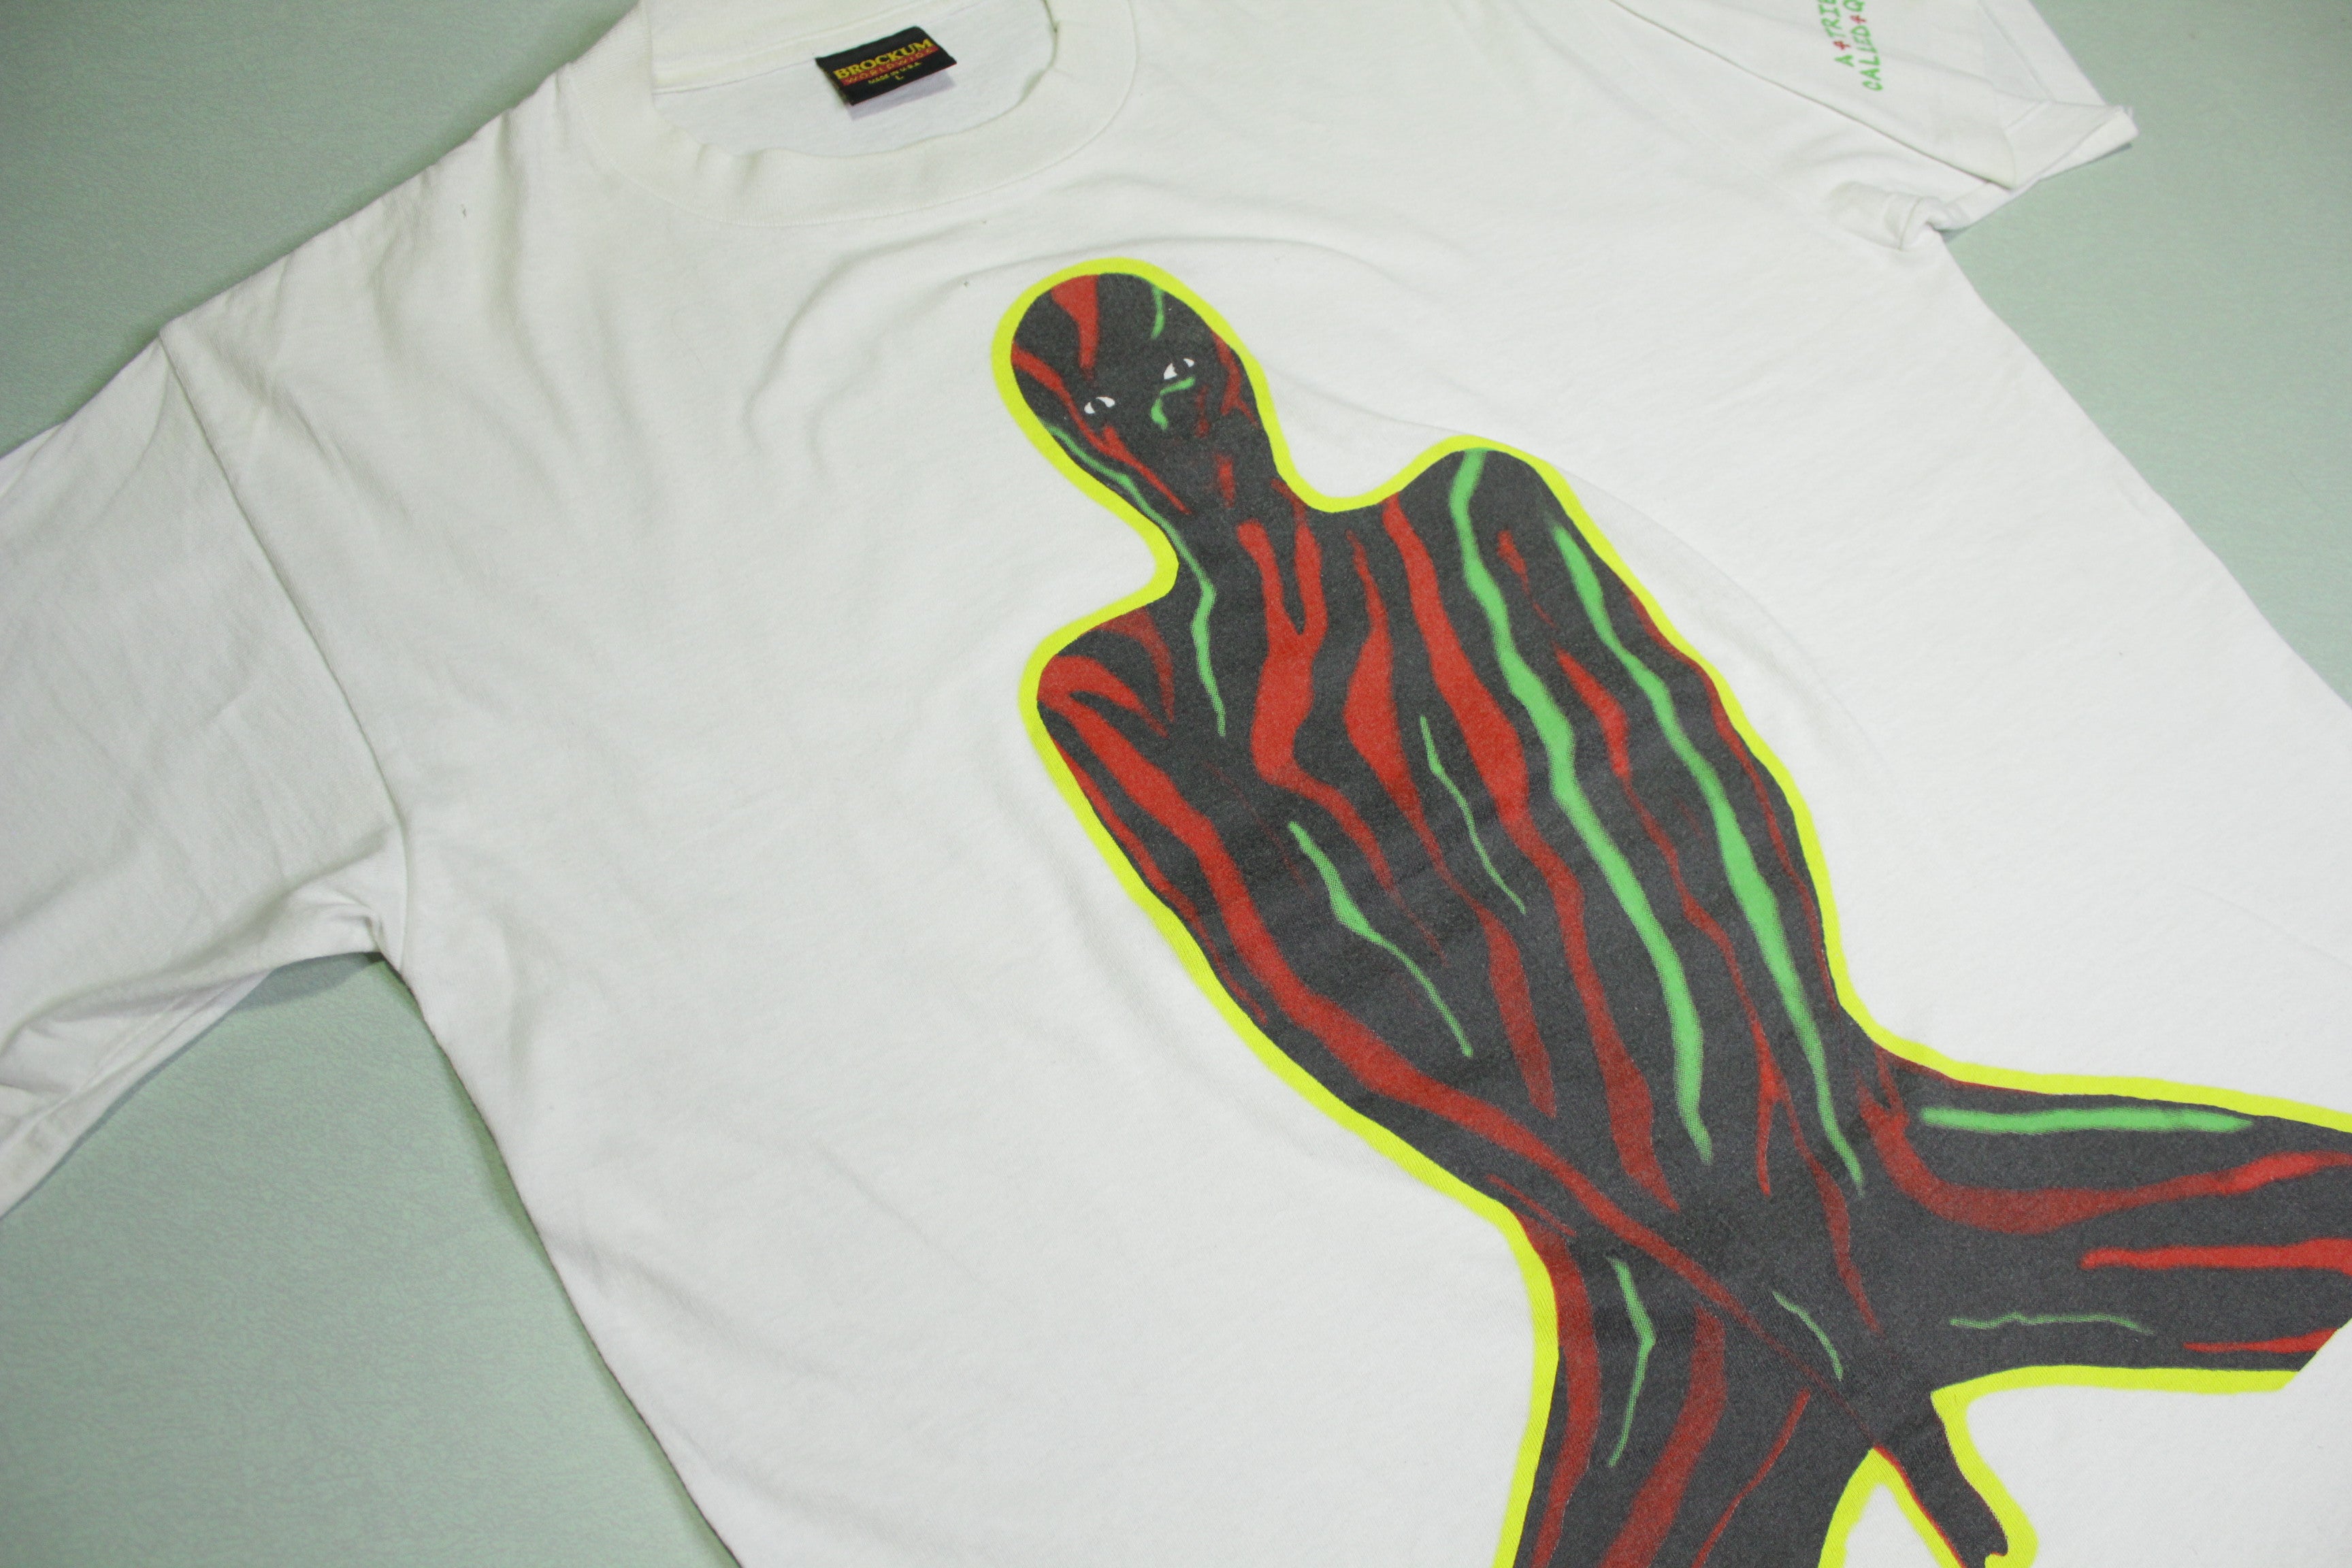 A Tribe Called Quest 1993 Midnight Marauders Vintage 90's Brockum